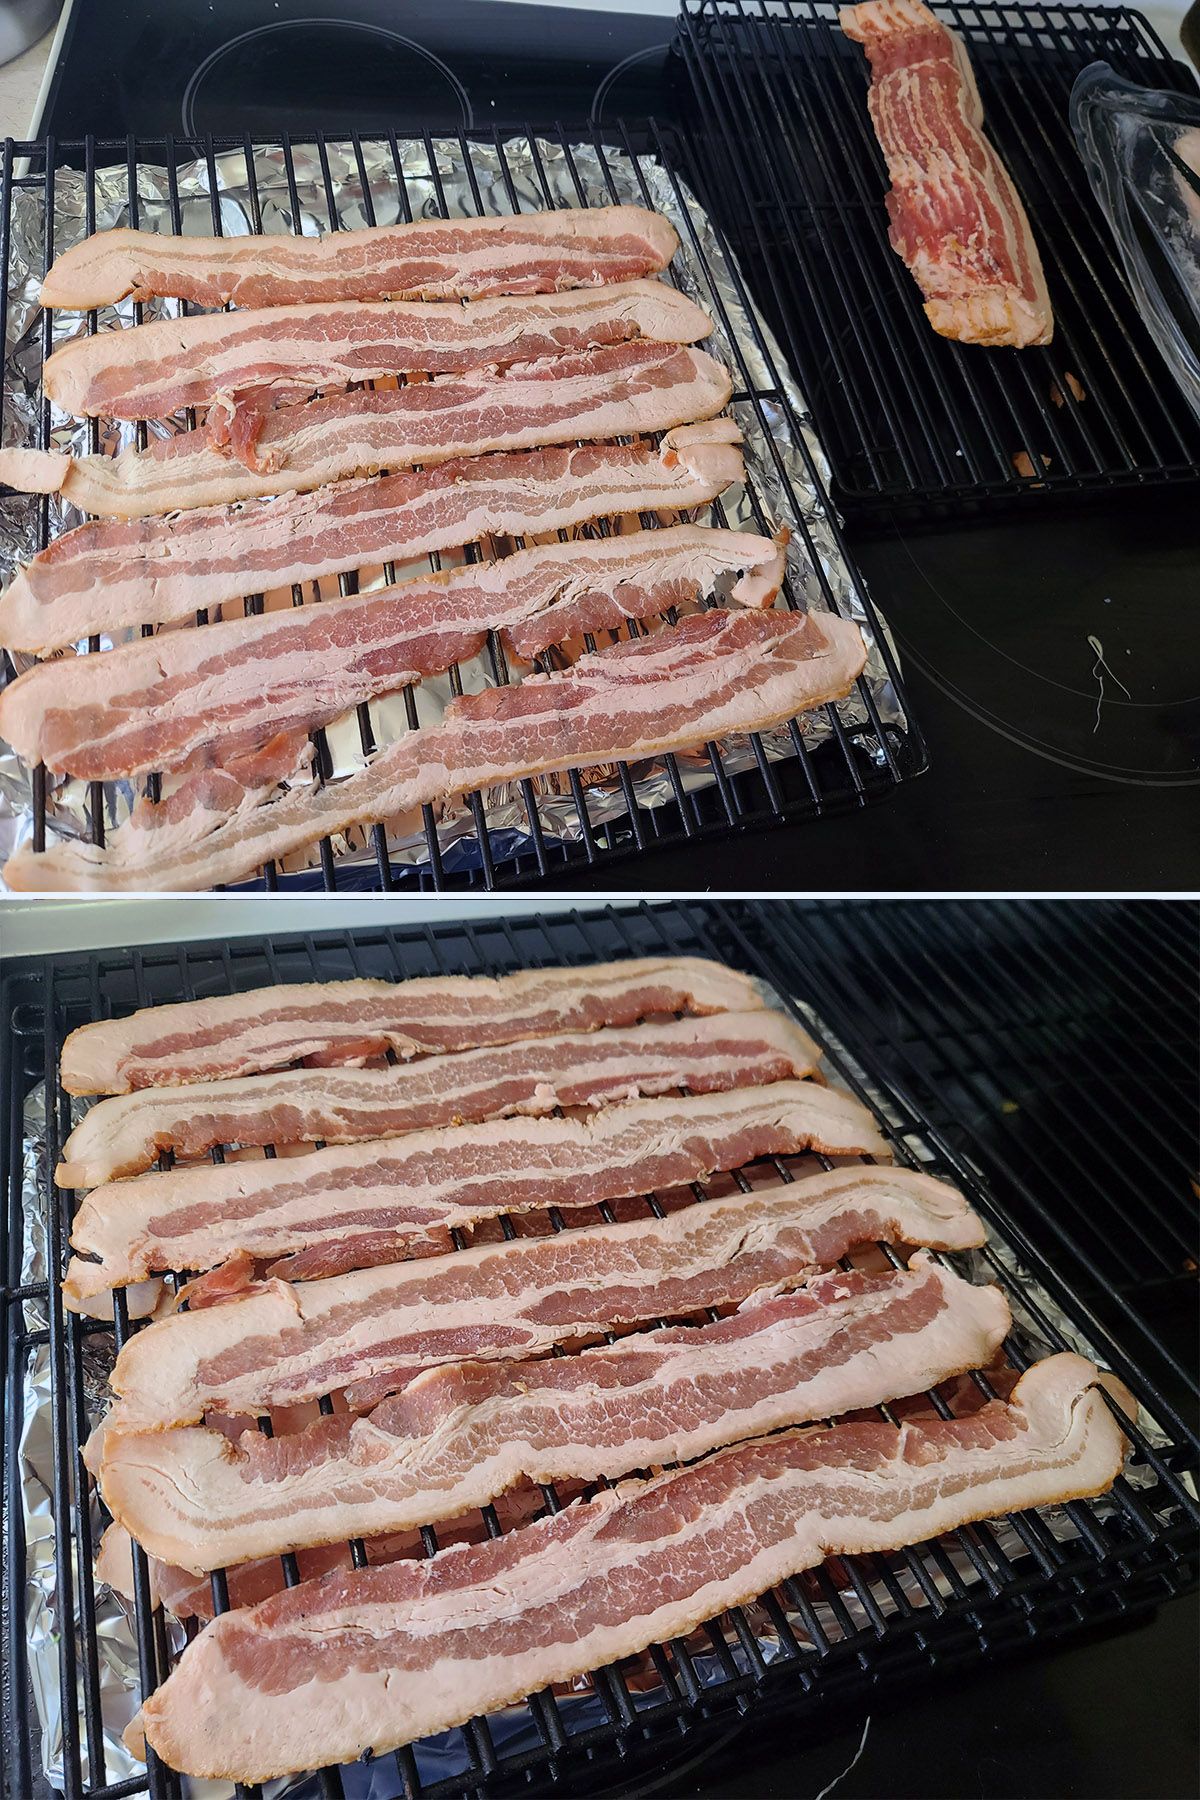 A 2 part image of bacon slices being arranged on multiple smoker racks.